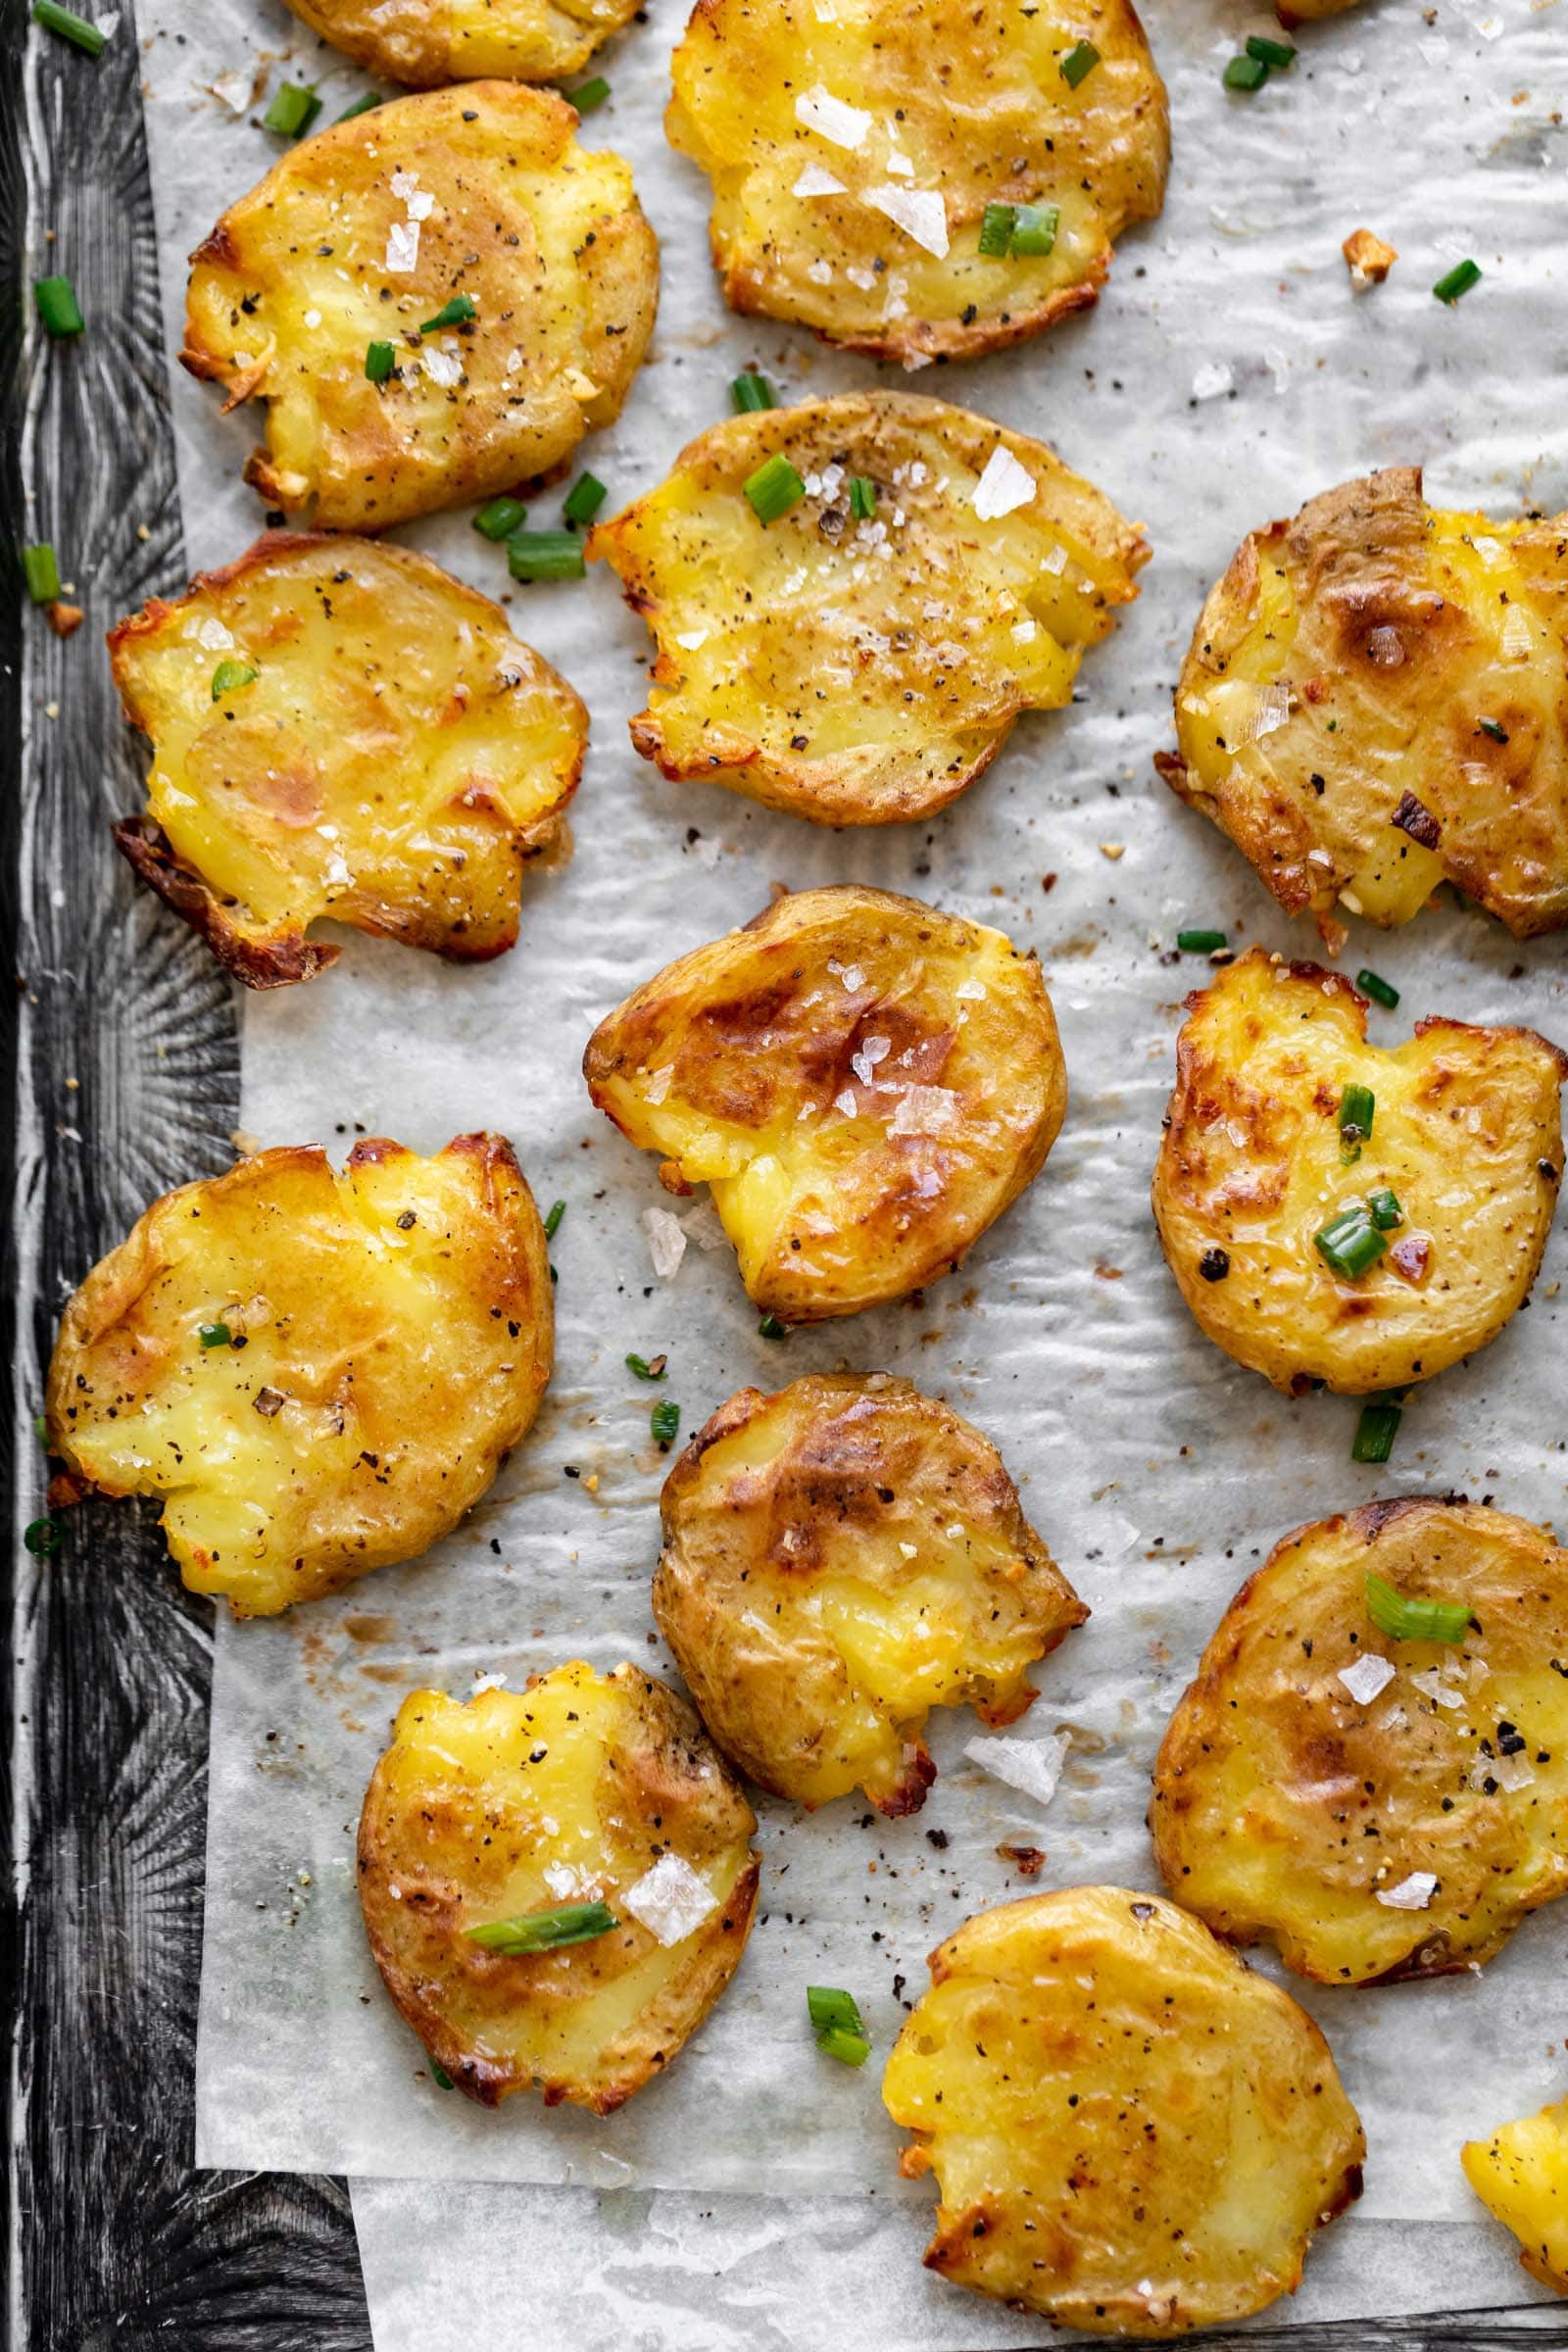 https://bromabakery.com/wp-content/uploads/2021/10/Air-Fryer-Smashed-Potatoes-8.jpg